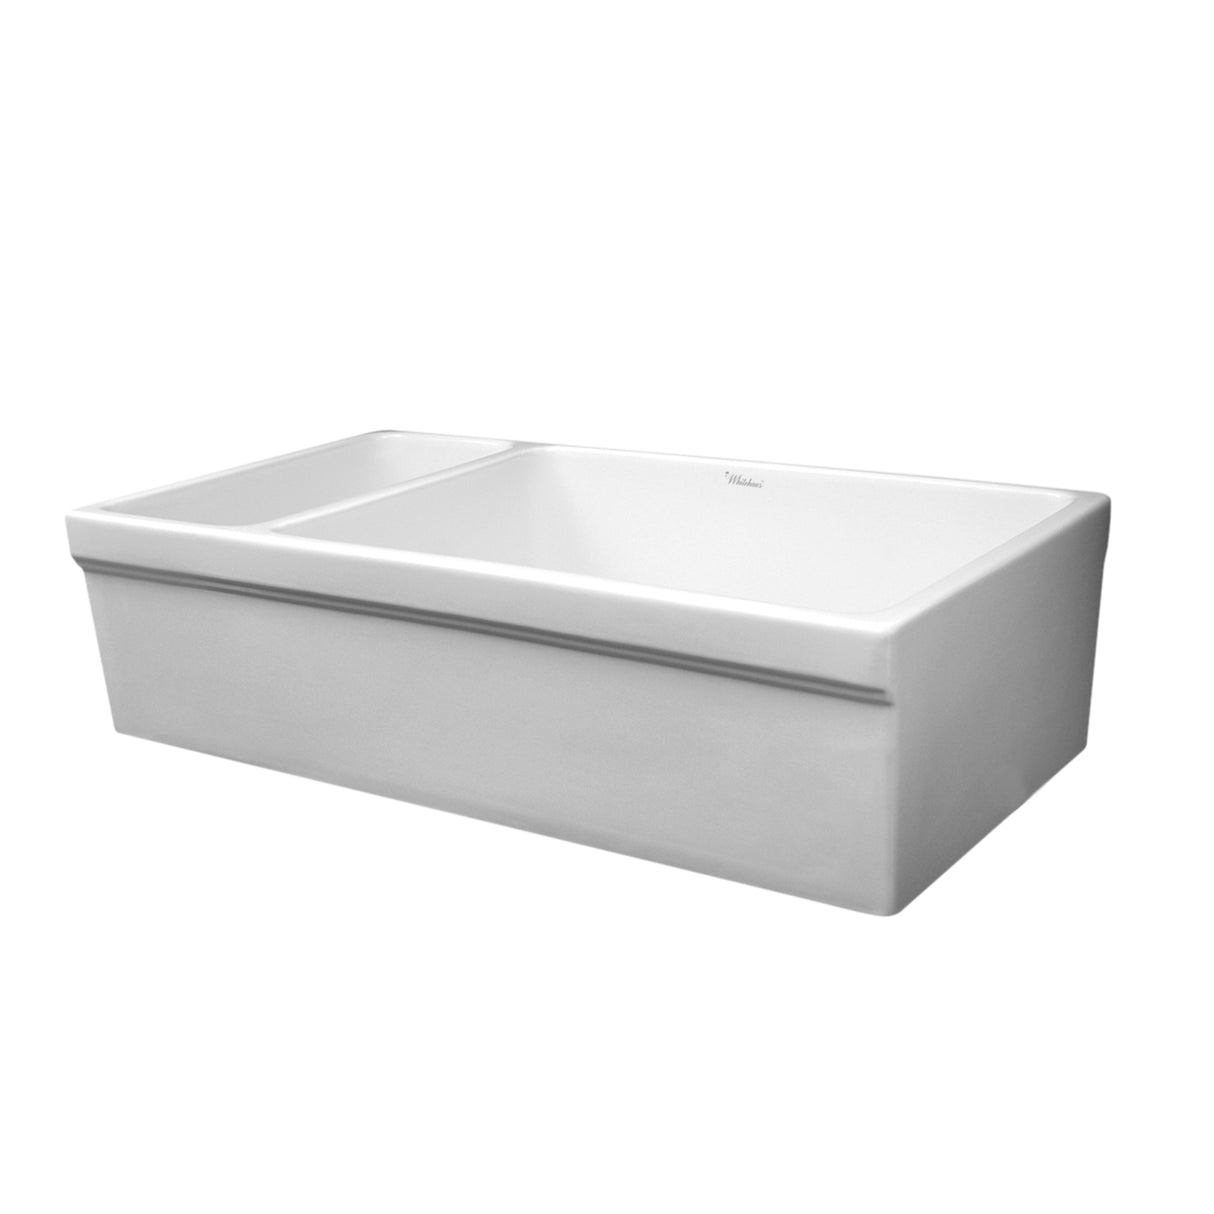 Farmhaus Fireclay Quatro Alcove Large Reversible Sink and Small Bowl with Decorative 2 ½" Lip on Both Sides